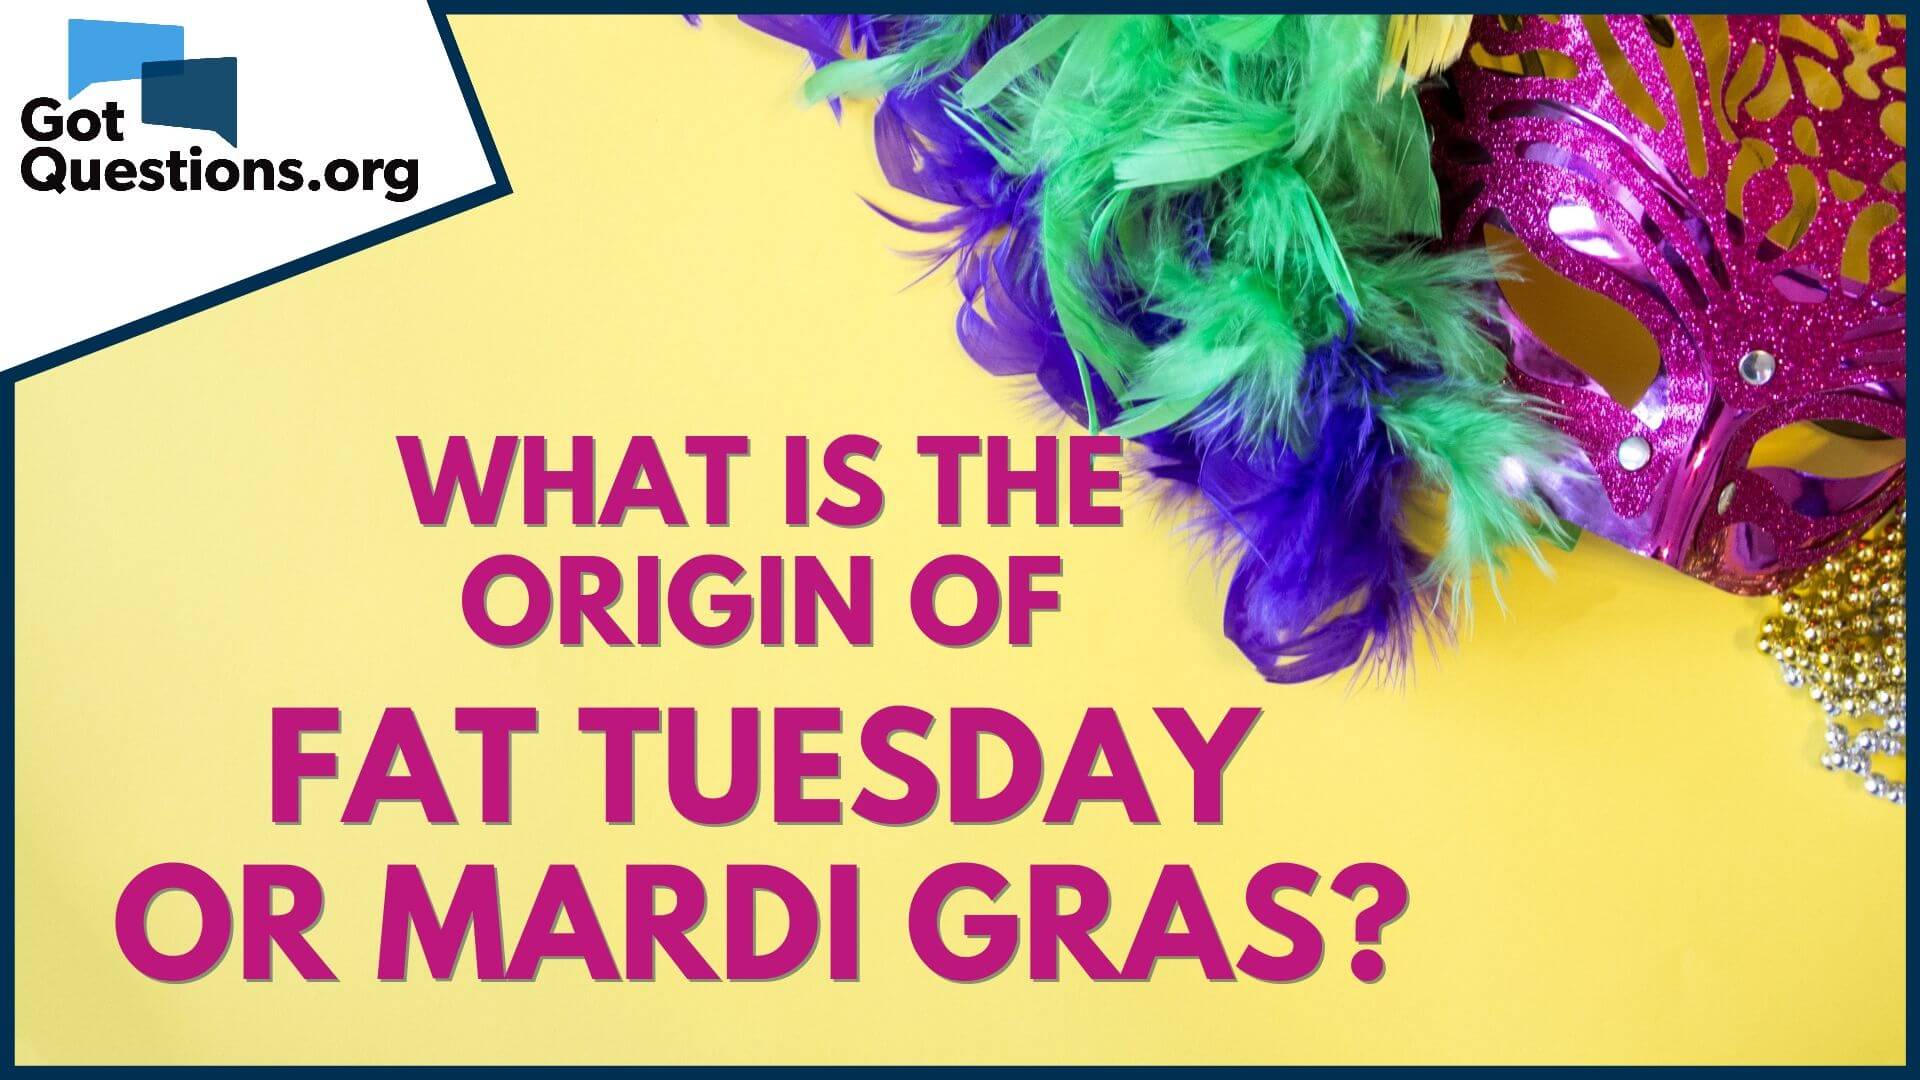 Wizard News: Mardi Gras, Fat Tuesday, Carnival and Carnaval